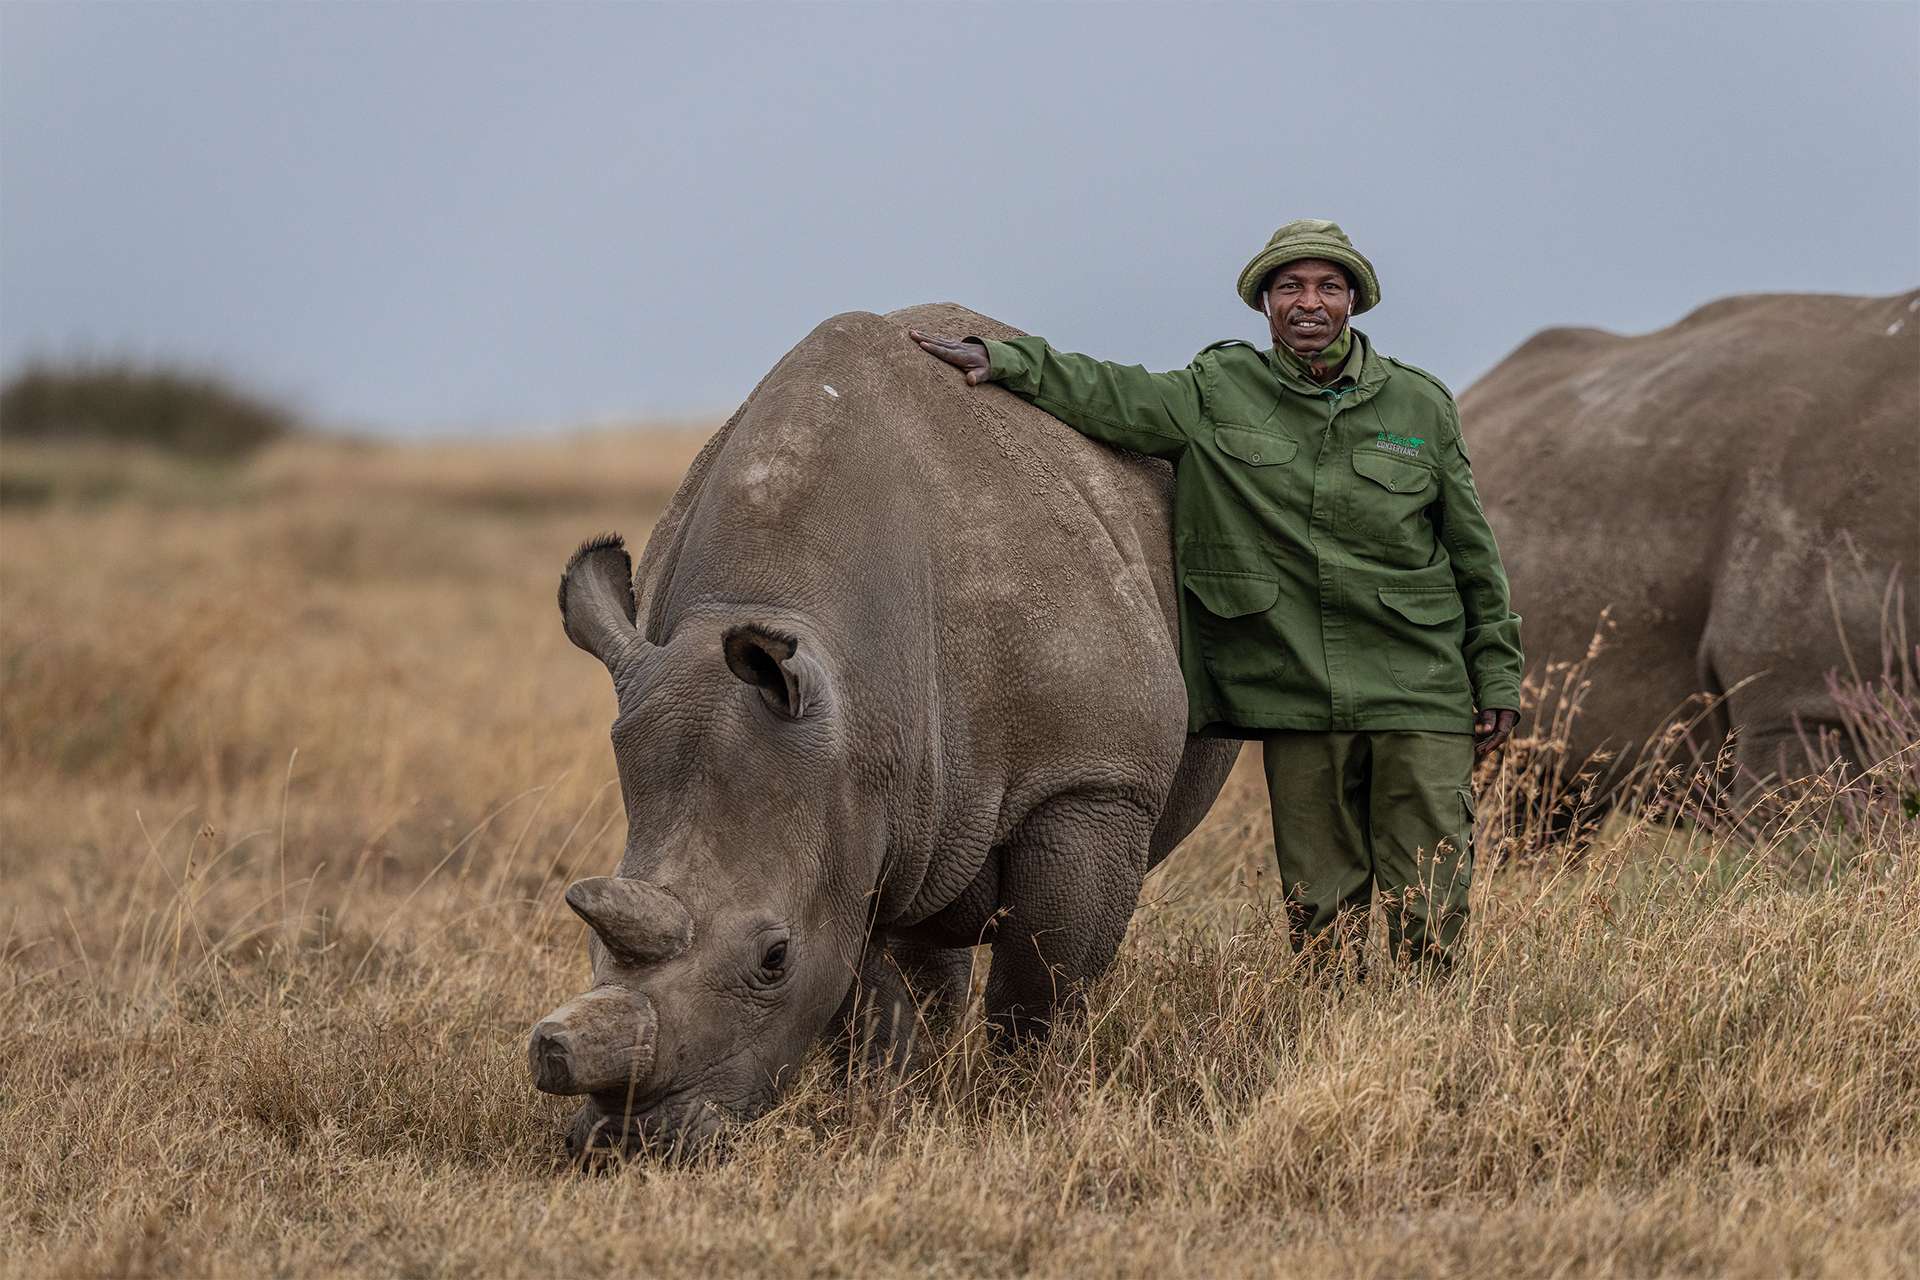 brave wildlife rangers who protect rhinos and other endangered species wildlife guide steward of the Earth’s biodiversity